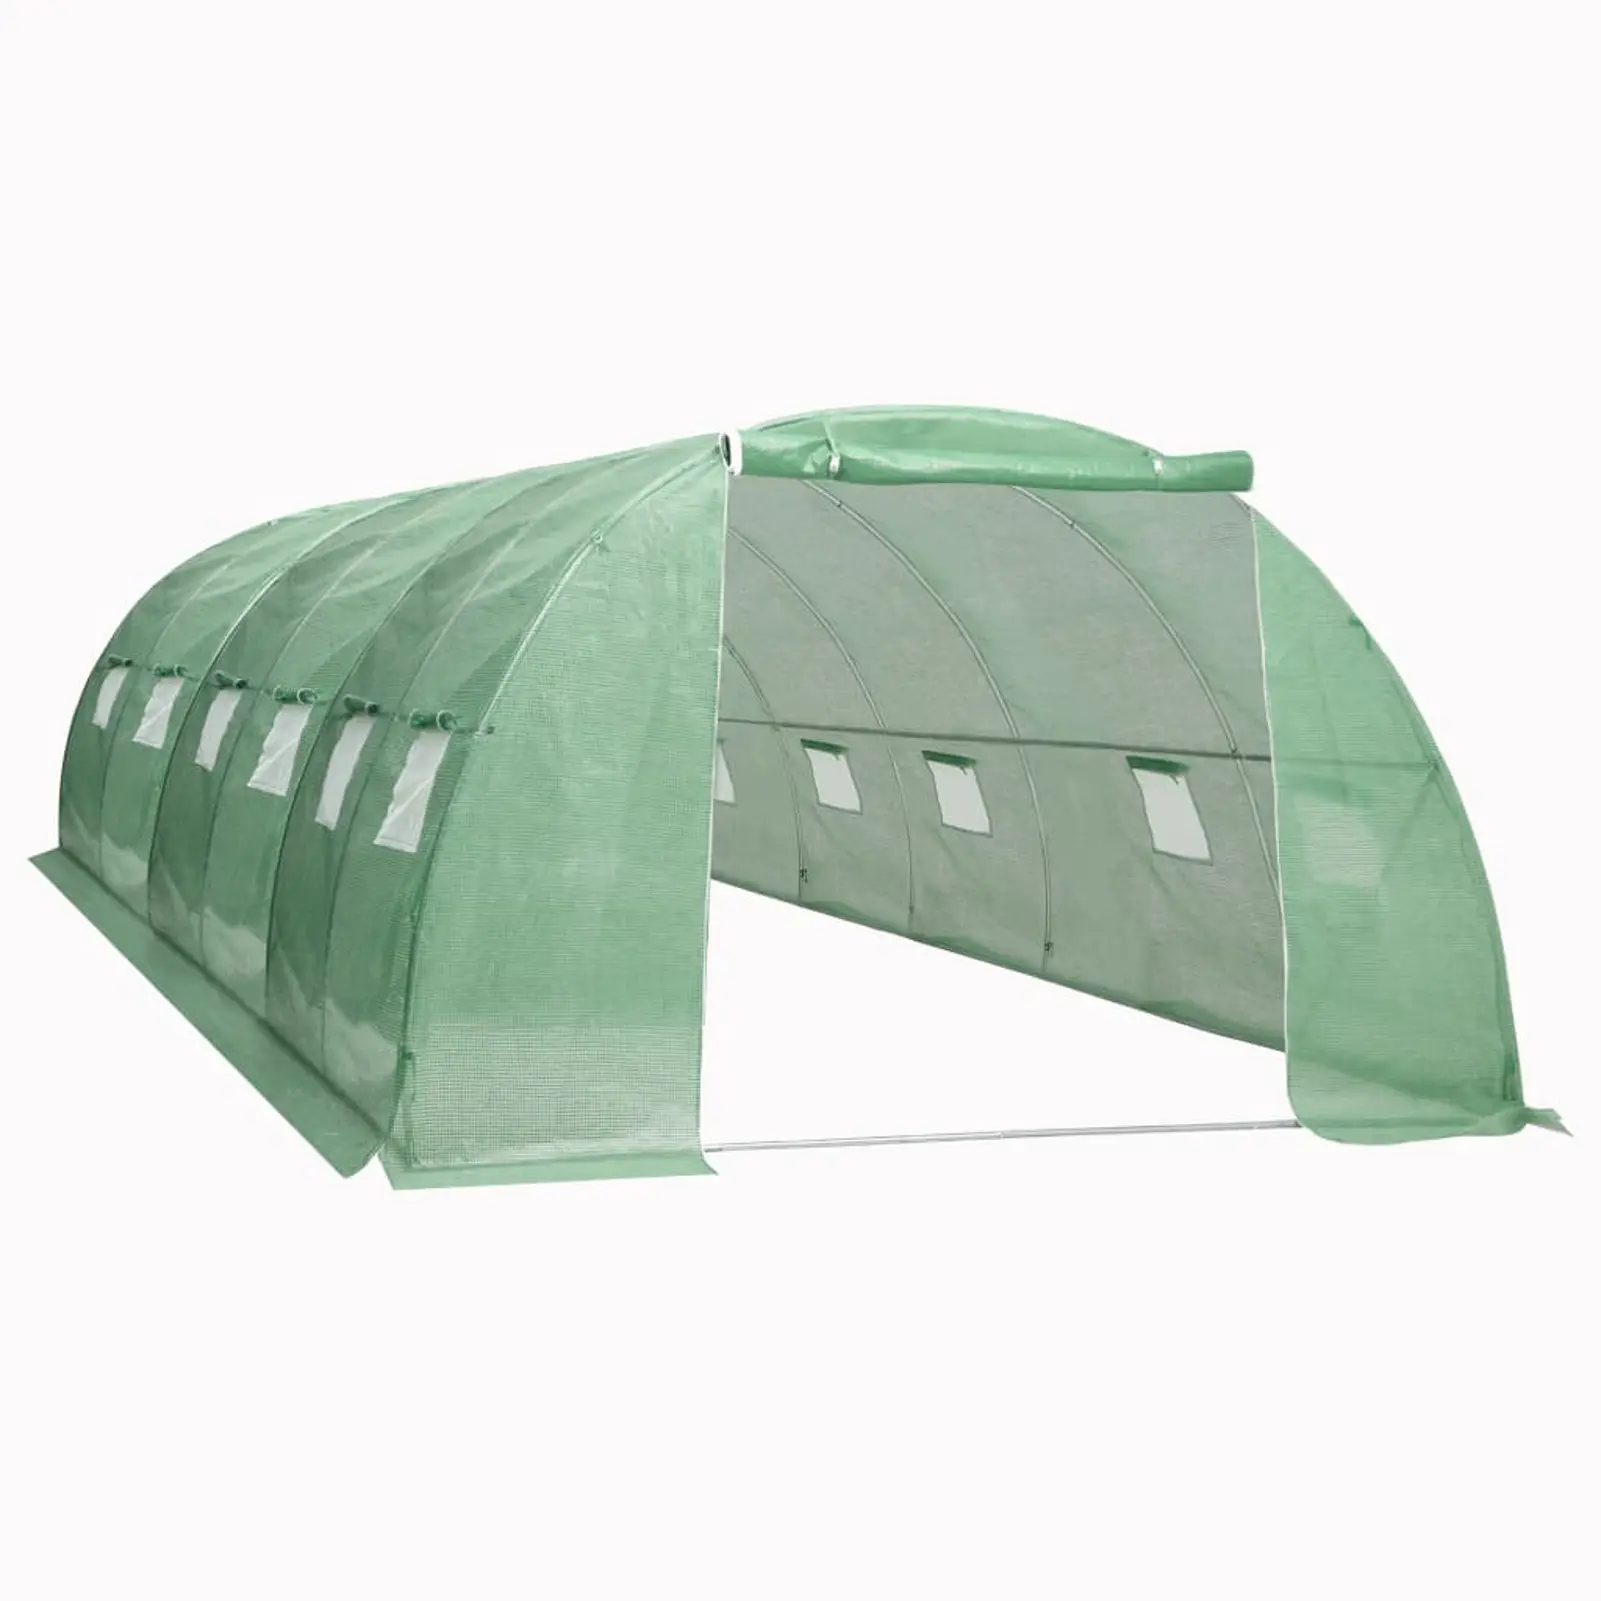 Green House Green Single-span Greenhouse For Vegetables Low Cost 9x30m Green House Frame